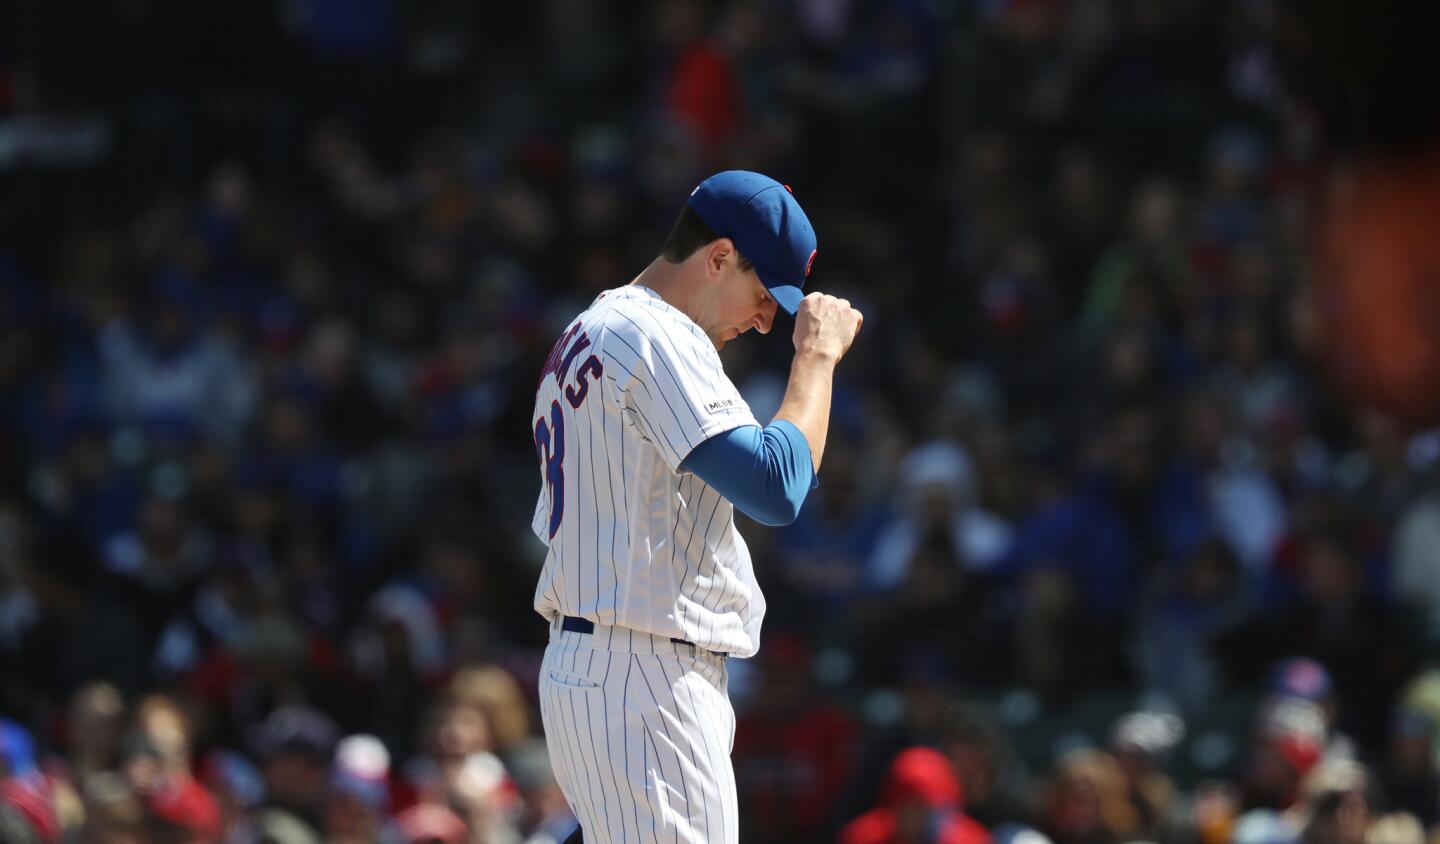 Cubs starting pitcher Kyle Hendricks adjusts his cap after loading the bases in the second inning against the Angels at Wrigley Field on April 13, 2019.